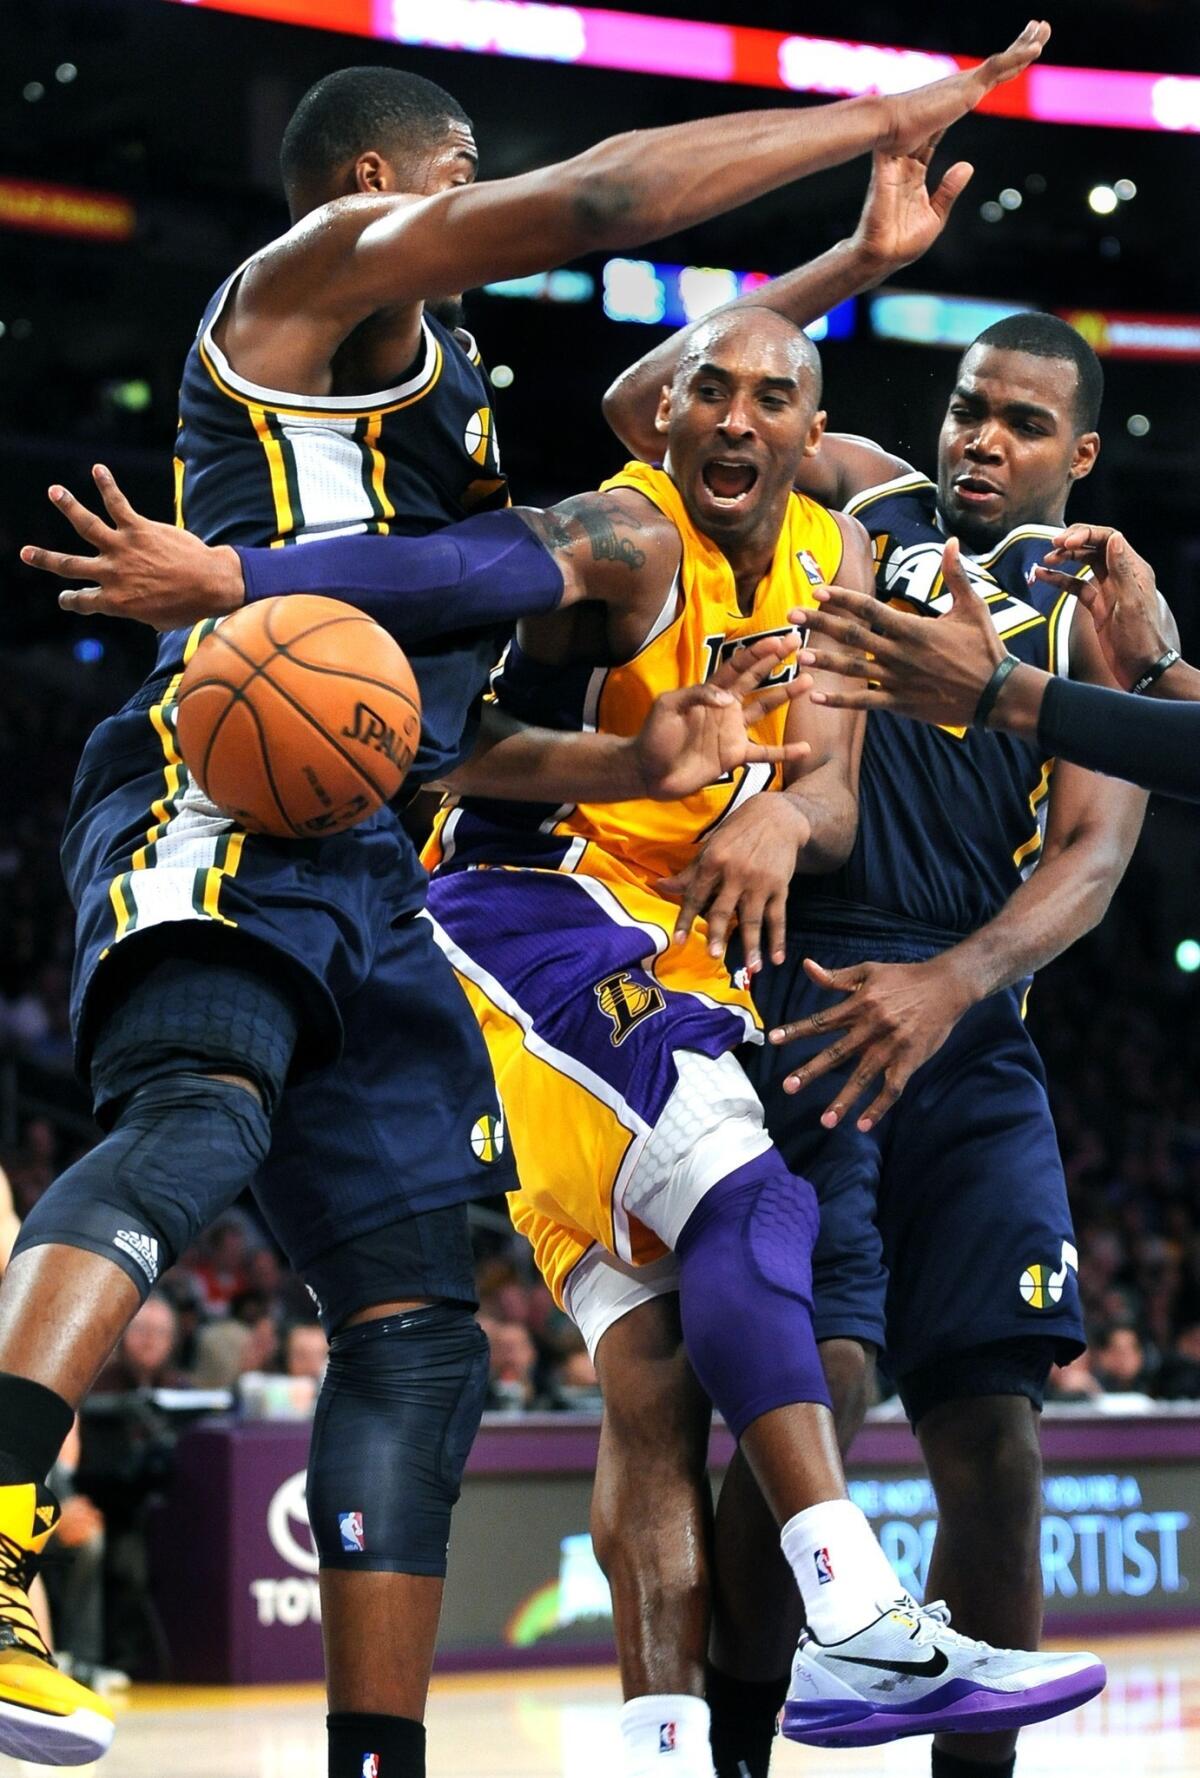 Will Kobe Bryant and the Lakers finish ahead of the Utah Jazz in the Western Conference standings this season?